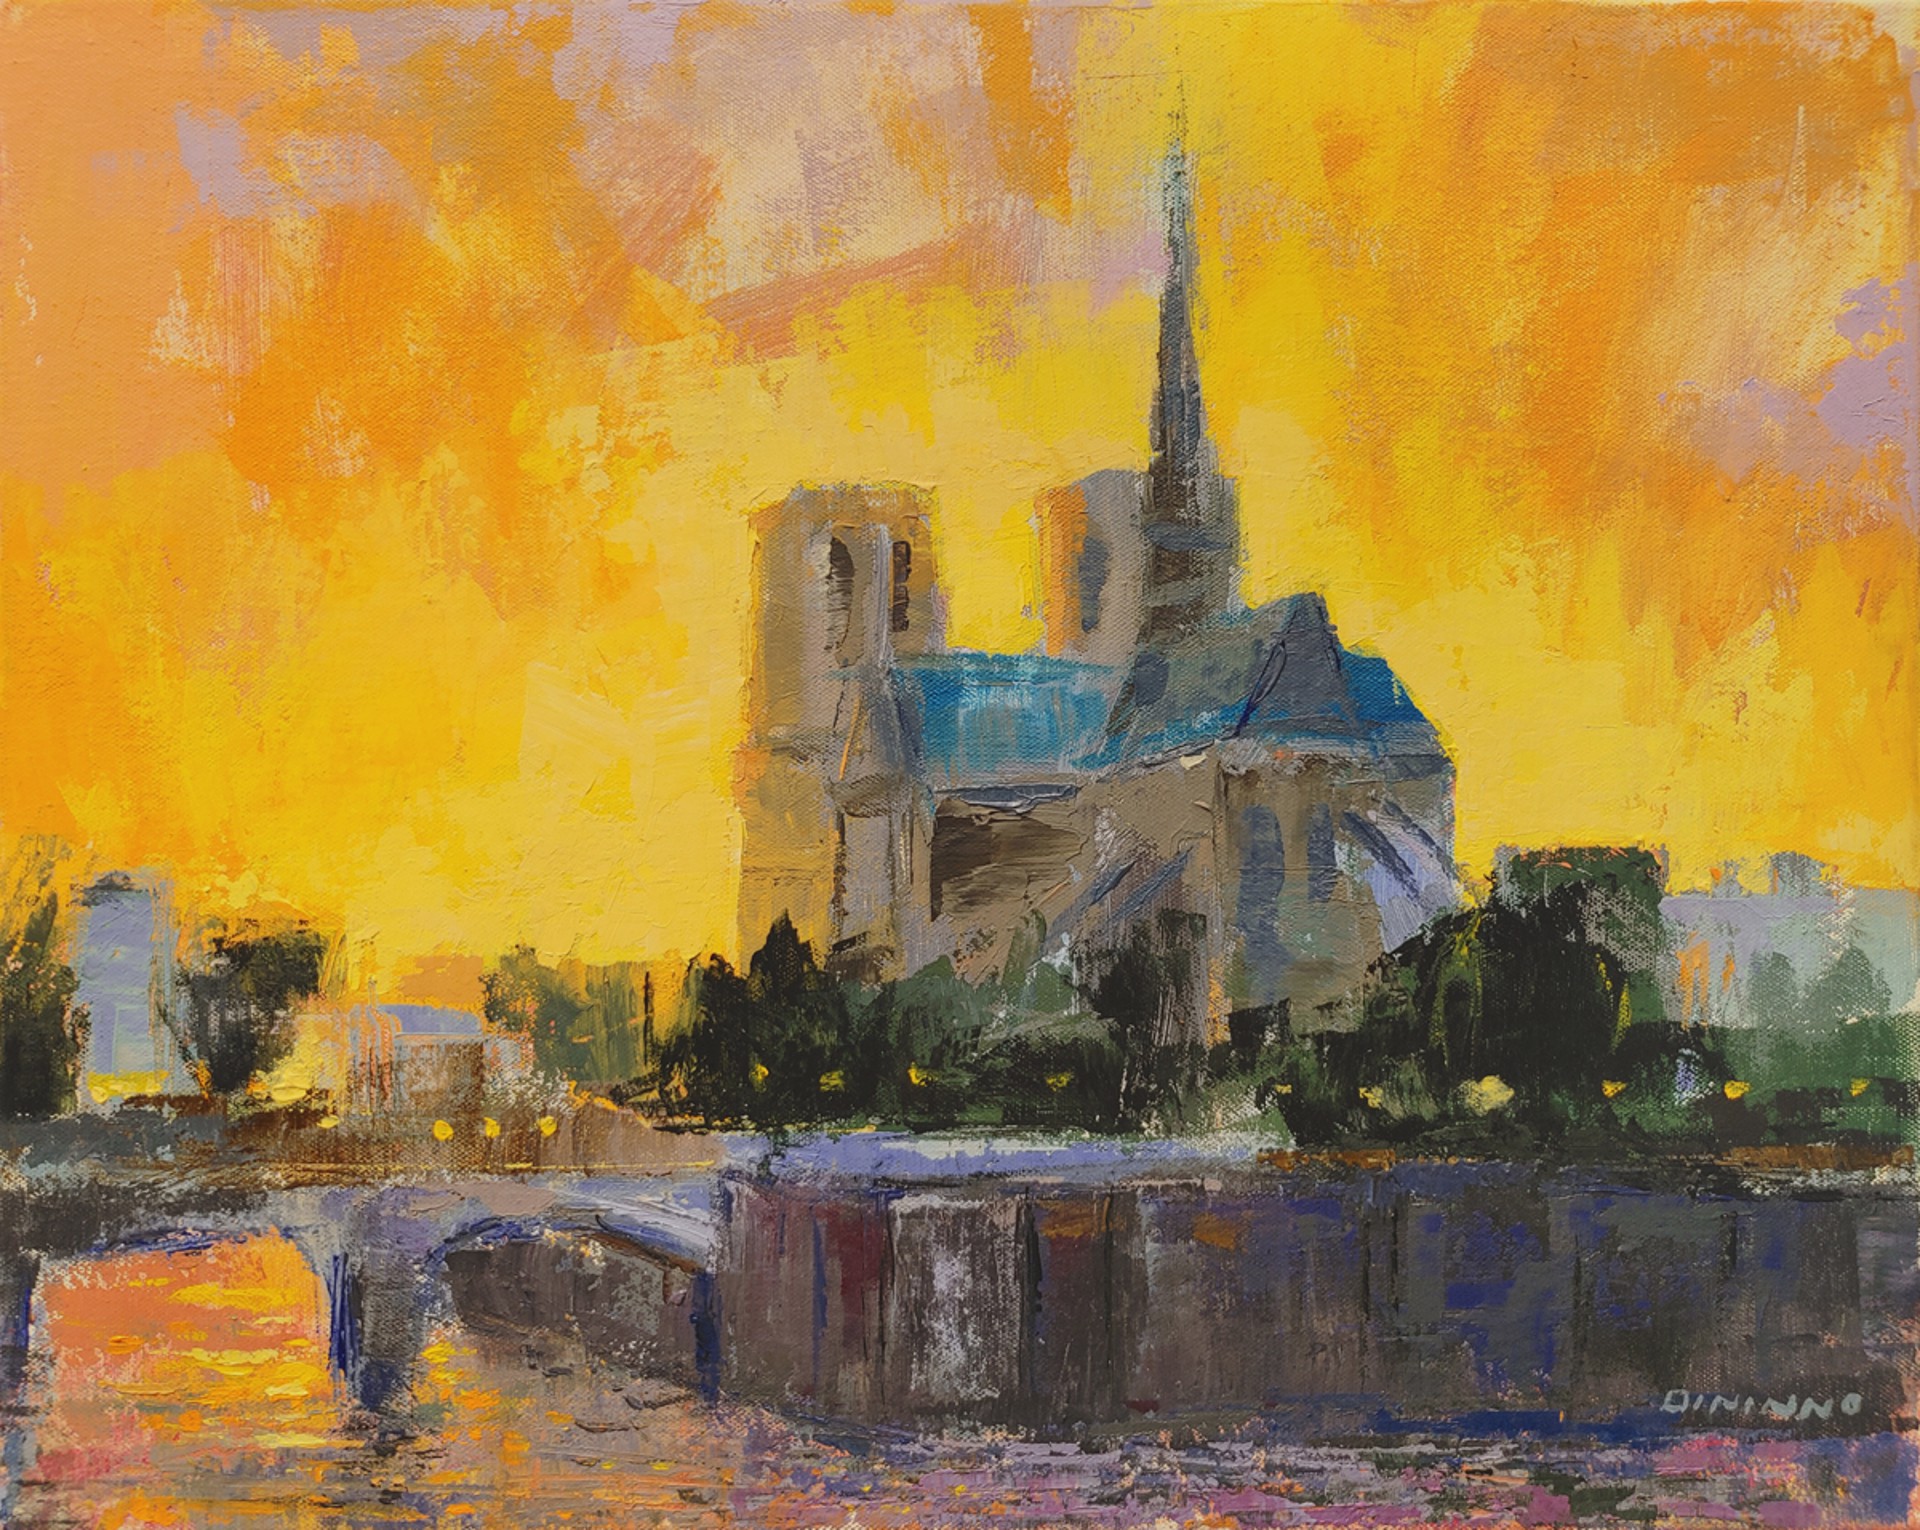 Notre Dame at Sunset by Steve Dininno